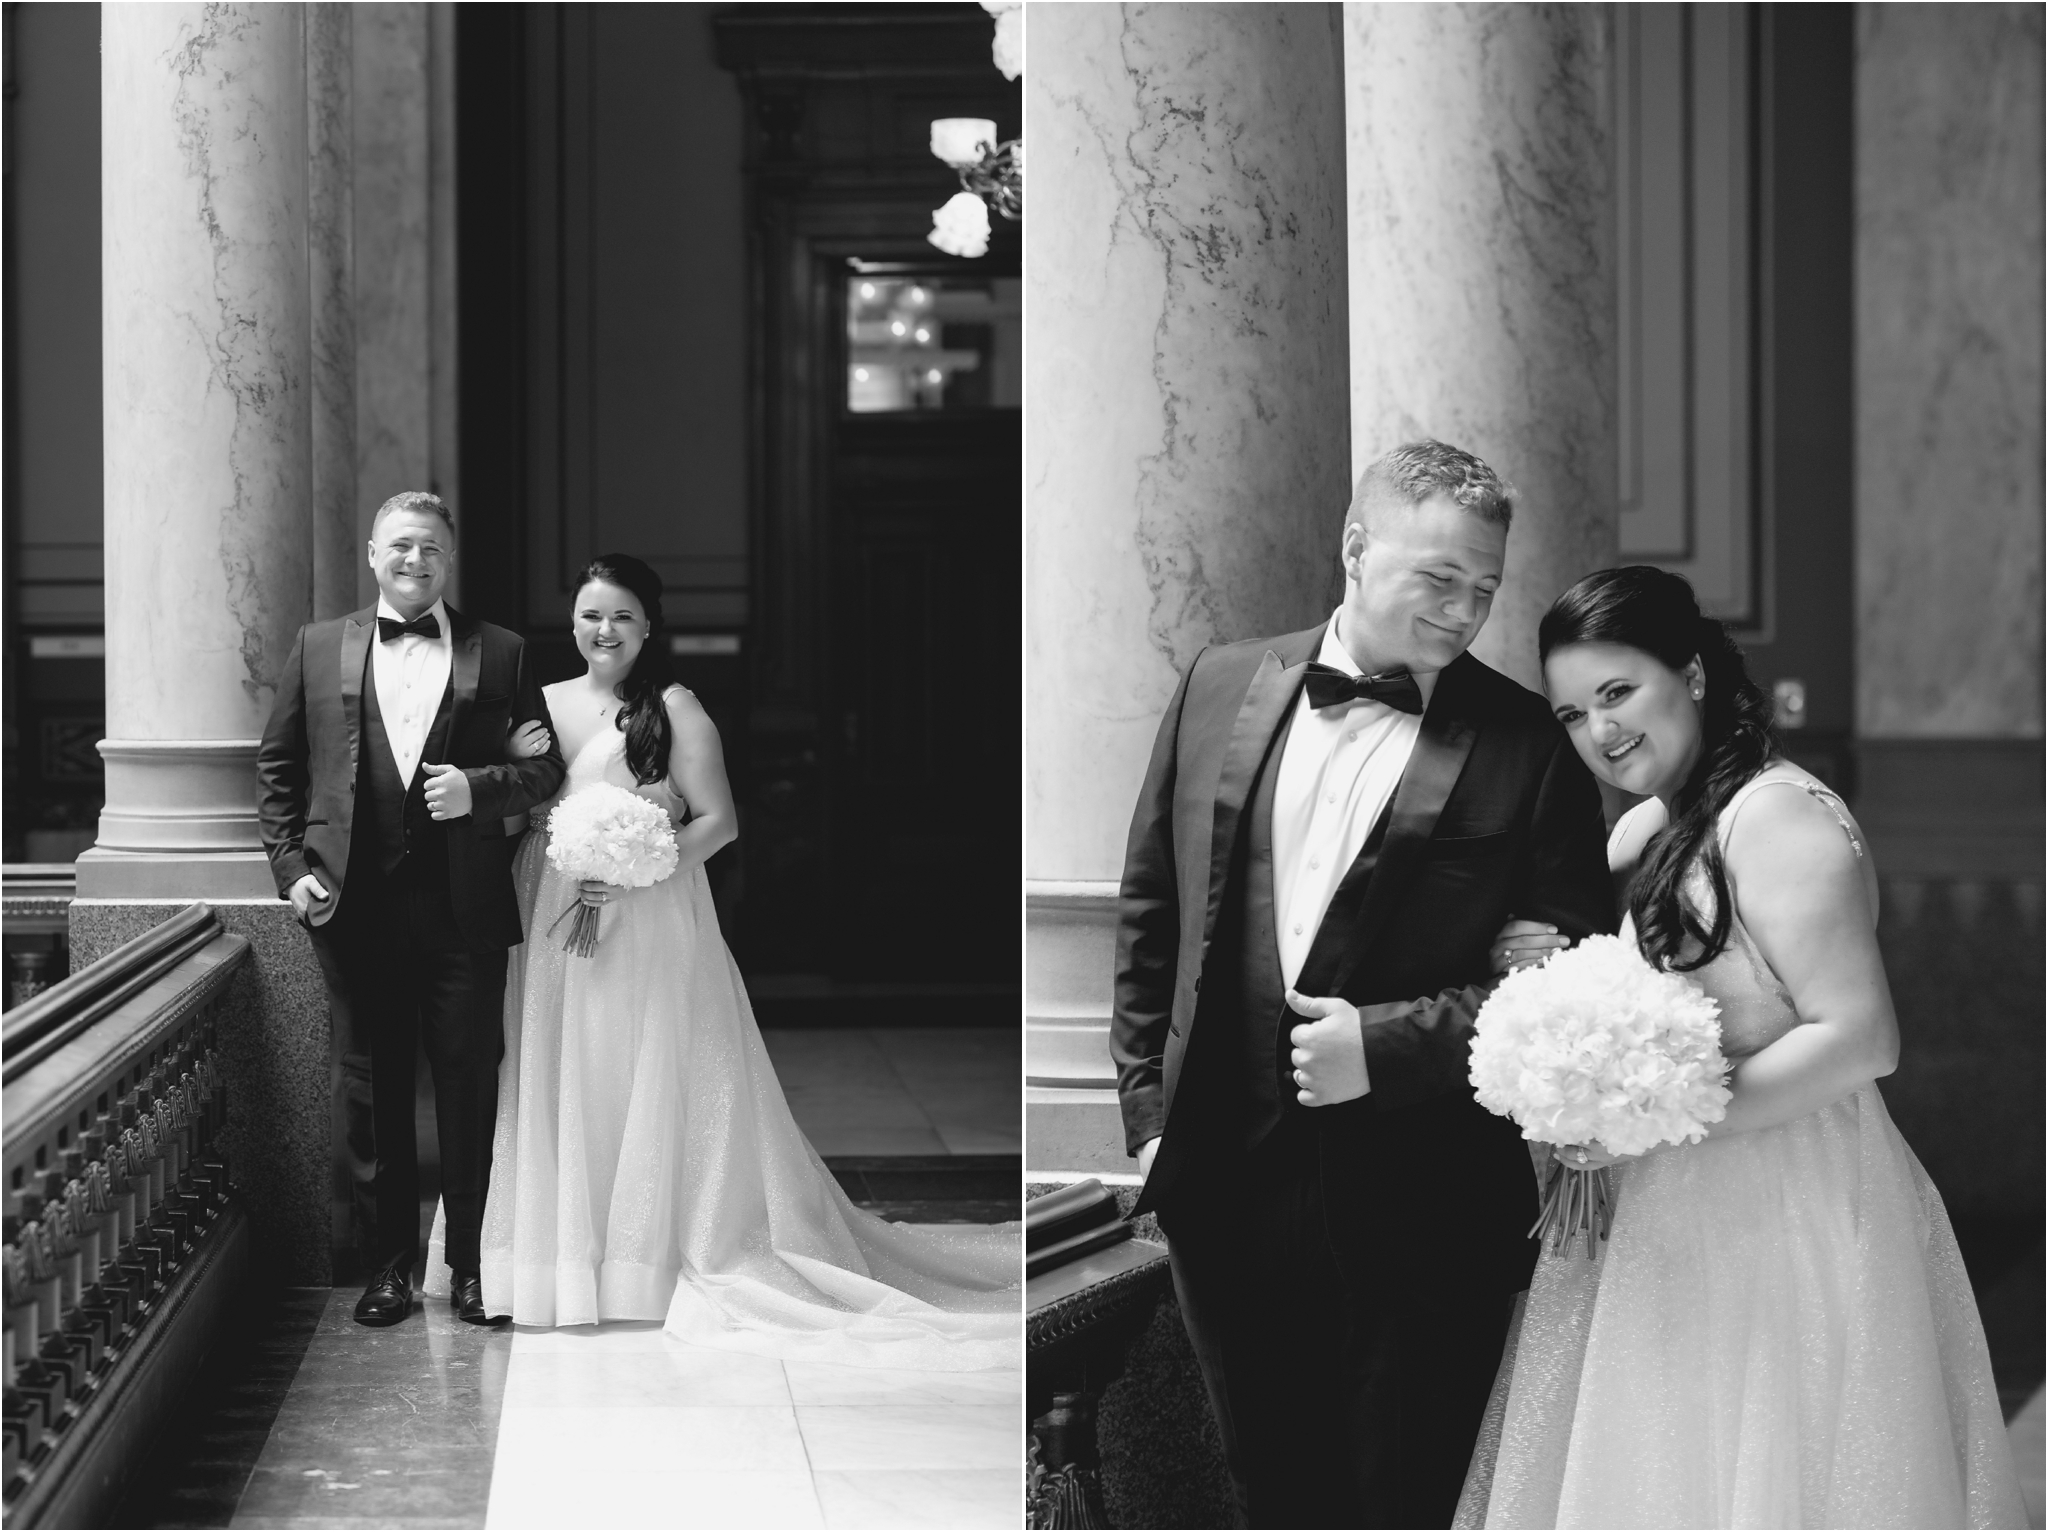 Indiana State House Ceremony | Sarah and Rachel Wedding Photographers | Indianapolis, IN | Beautiful classic Bridal Portraits